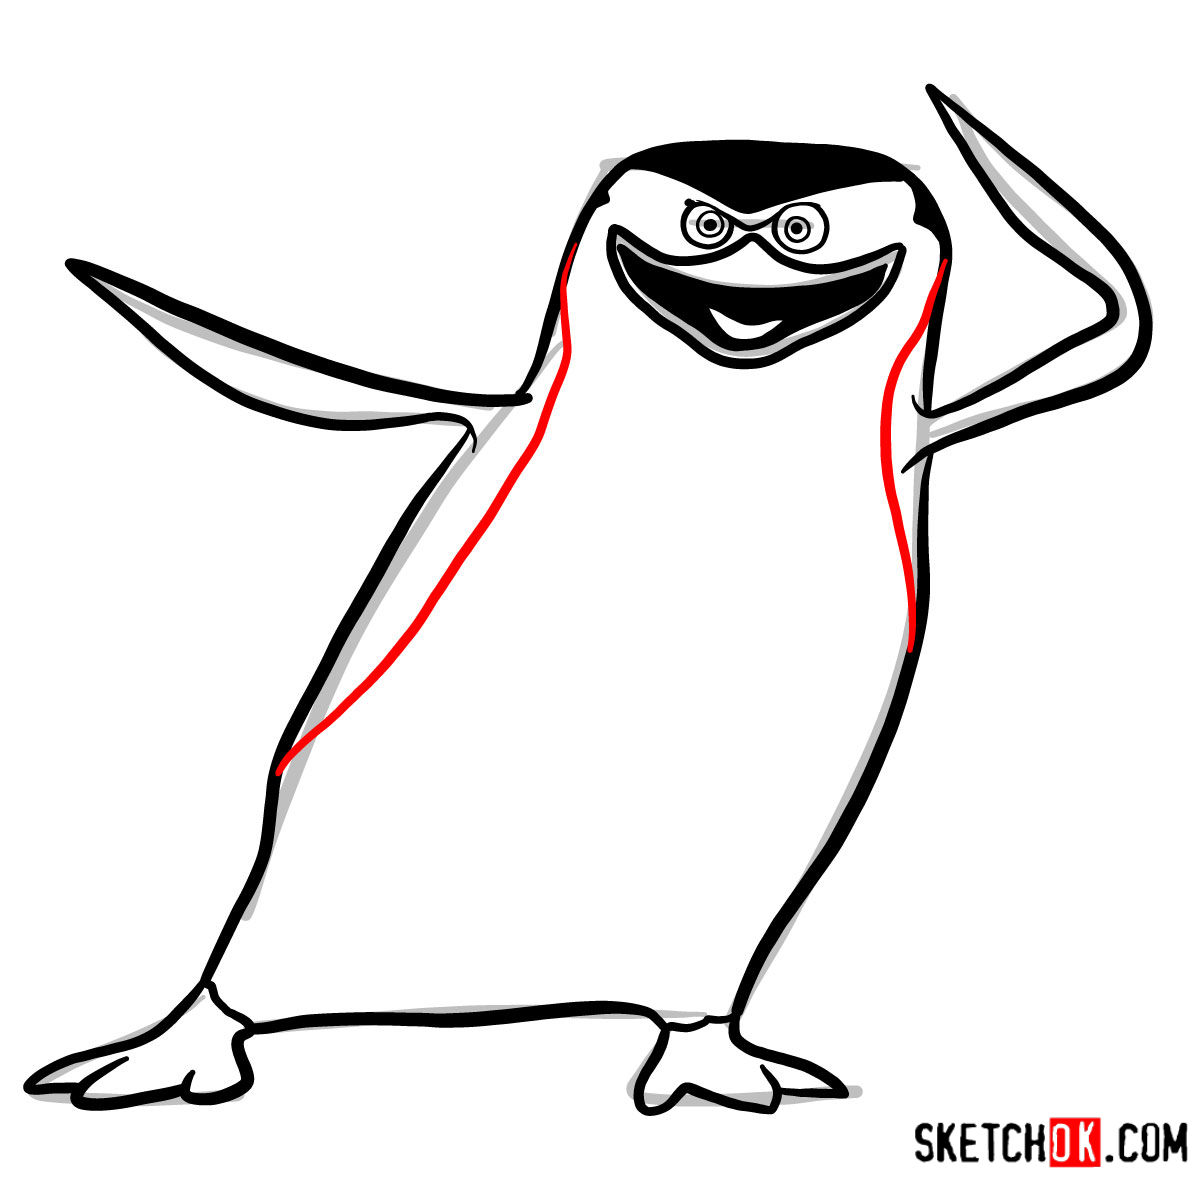 Learn How to Draw Skipper, Madagascar's Penguin Leader